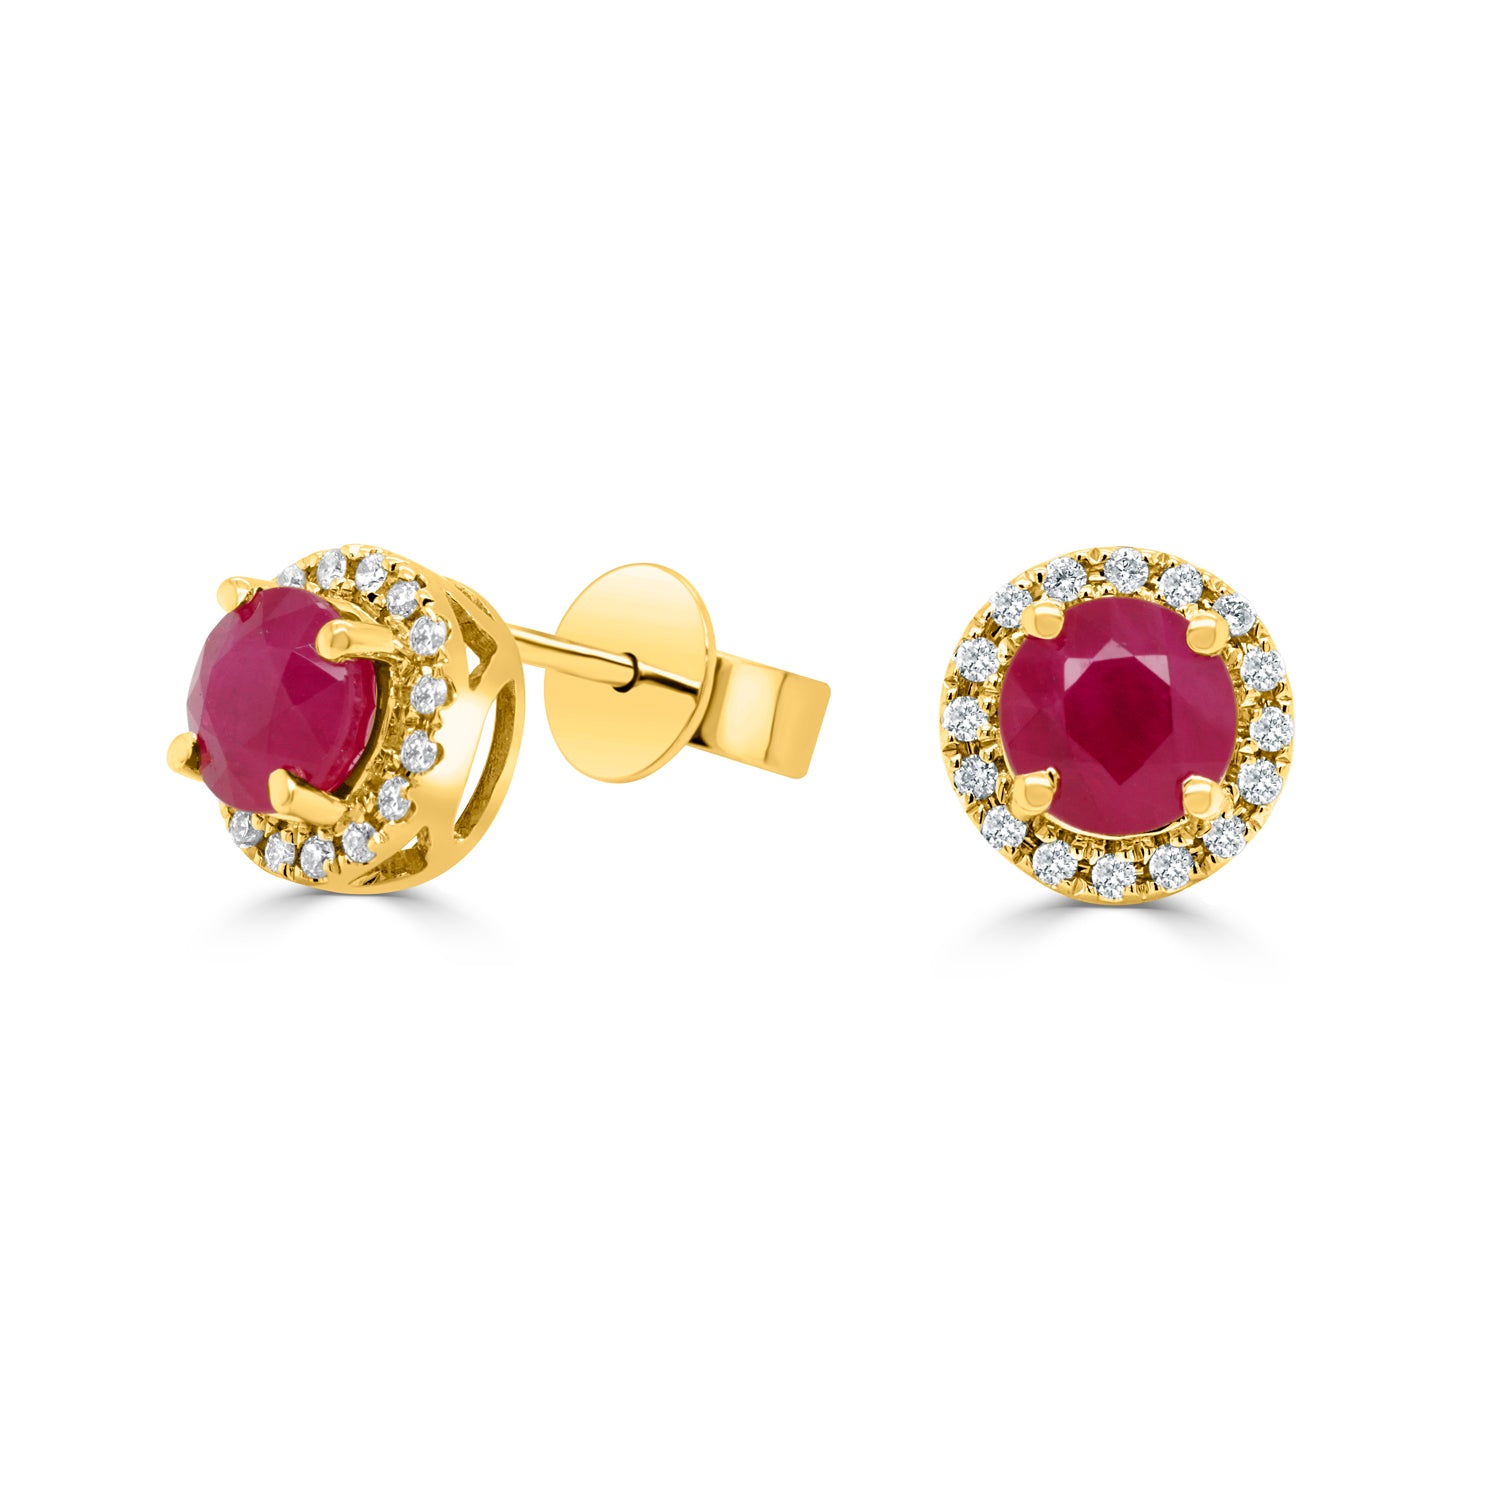 14K White Gold Round Ruby and Diamond Halo Stud Earrings - Paul's  Jewelry-Jewelry is Personal.